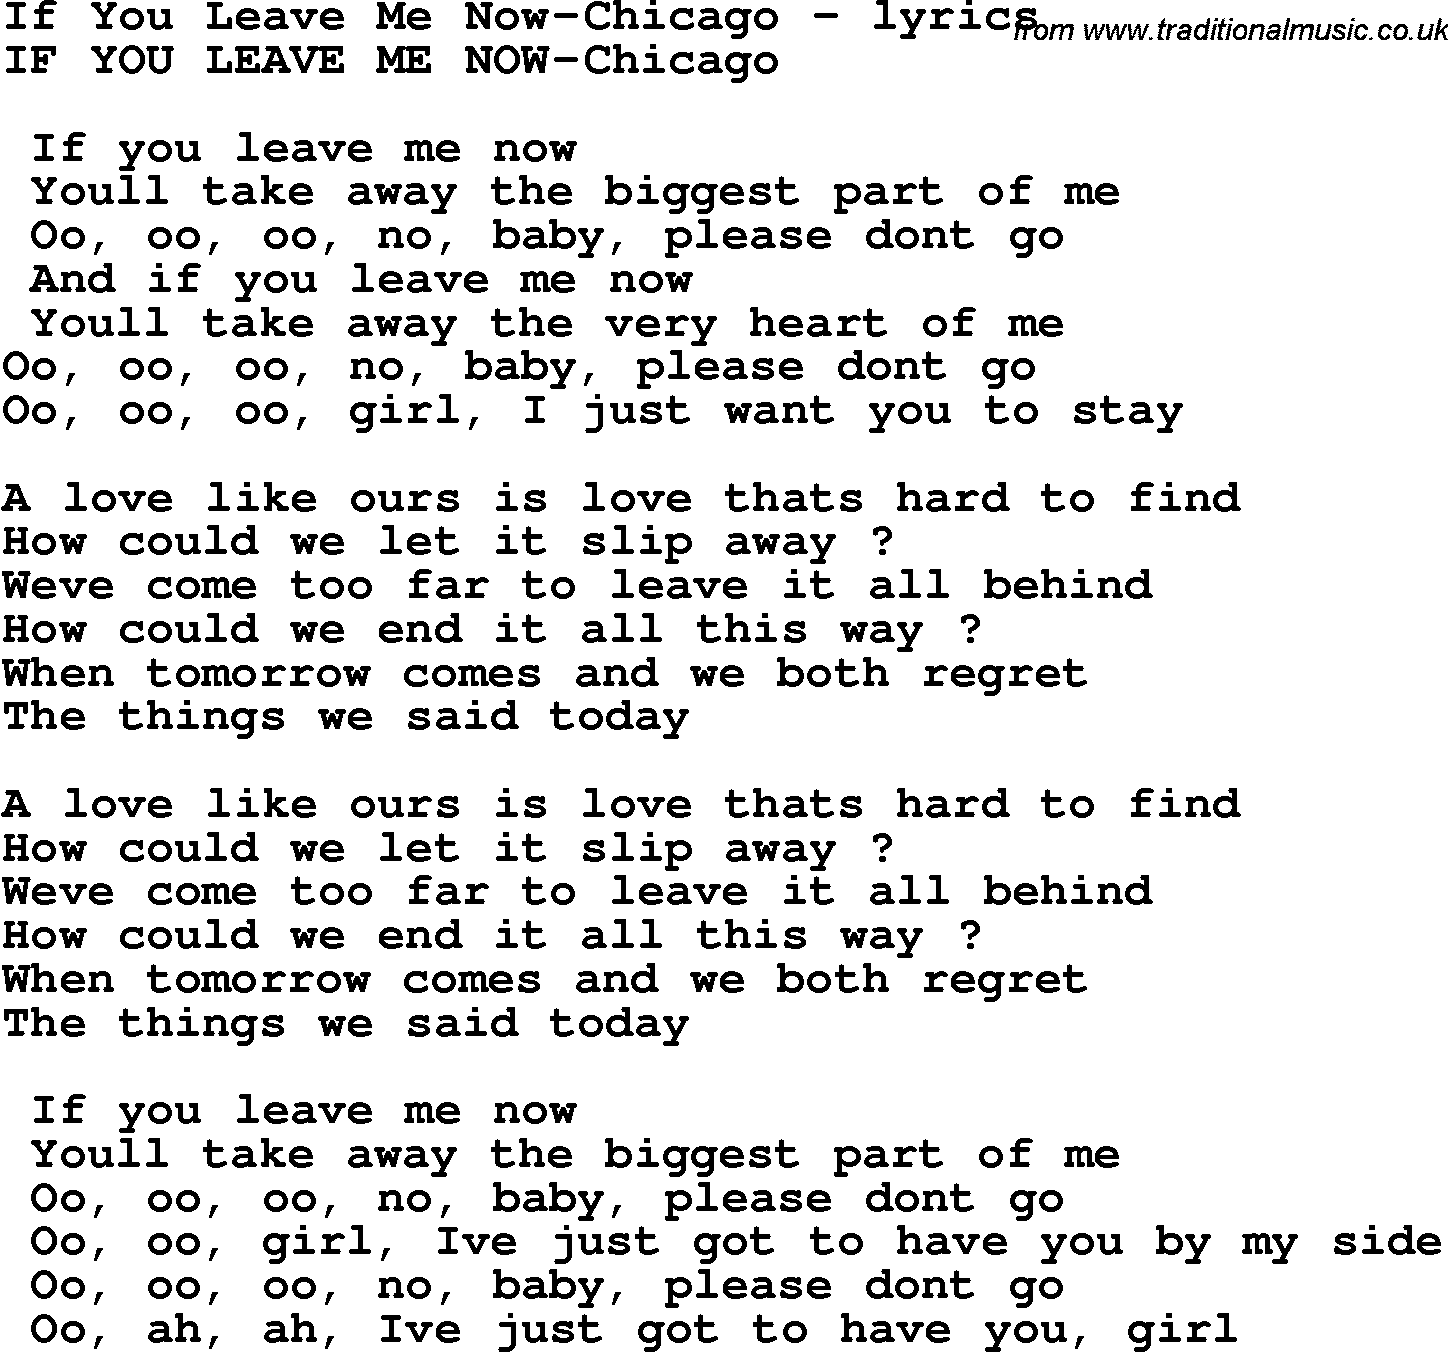 Love Song Lyrics for: If You Leave Me Now-Chicago